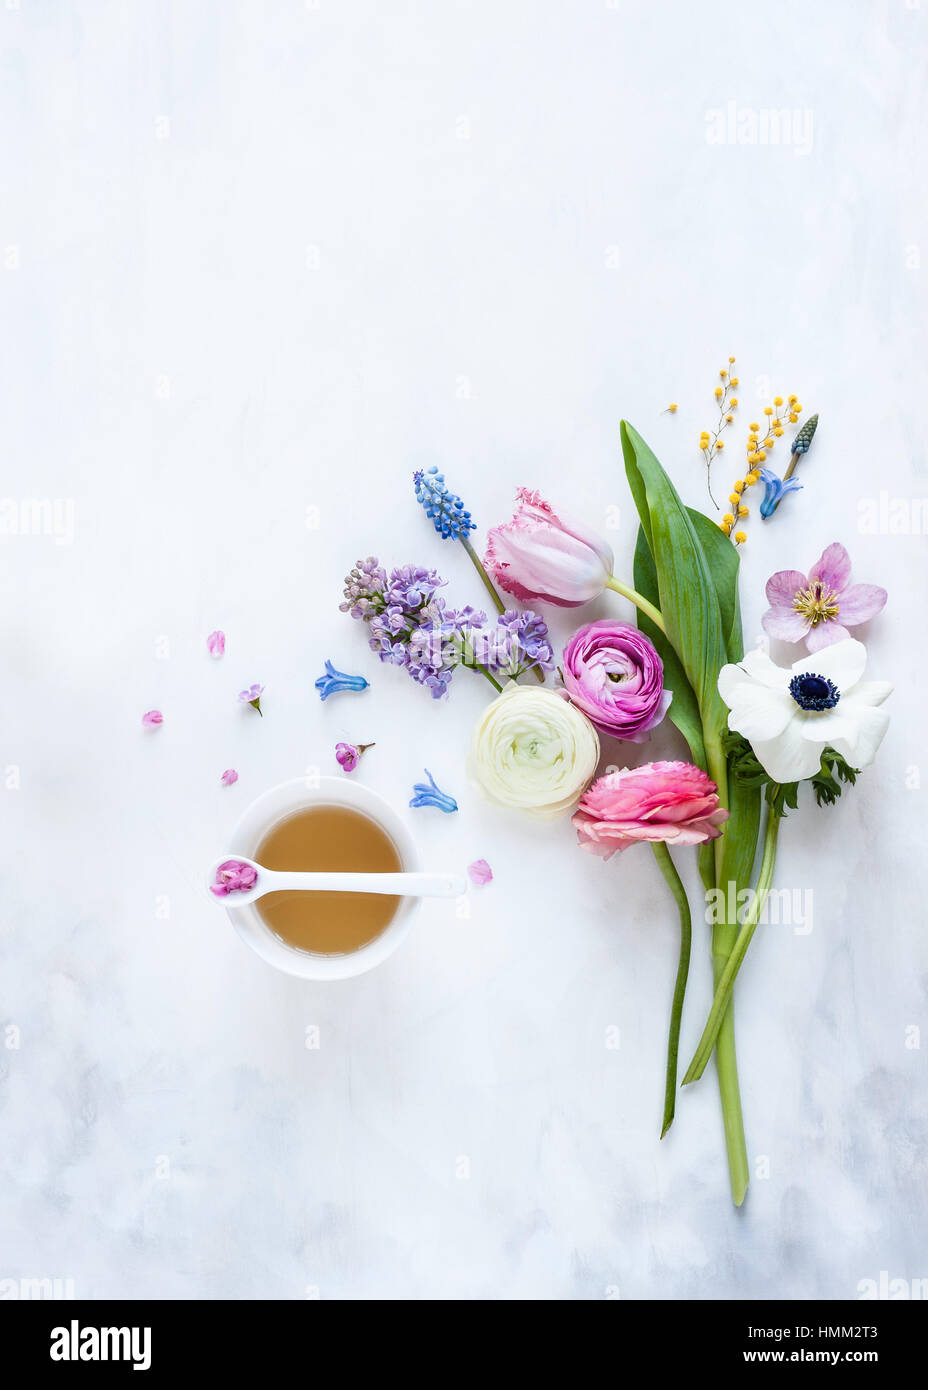 Flat lay of spring flowers arranged around a teacup on a painted white and grey backdrop styled, photographed in natural light Stock Photo